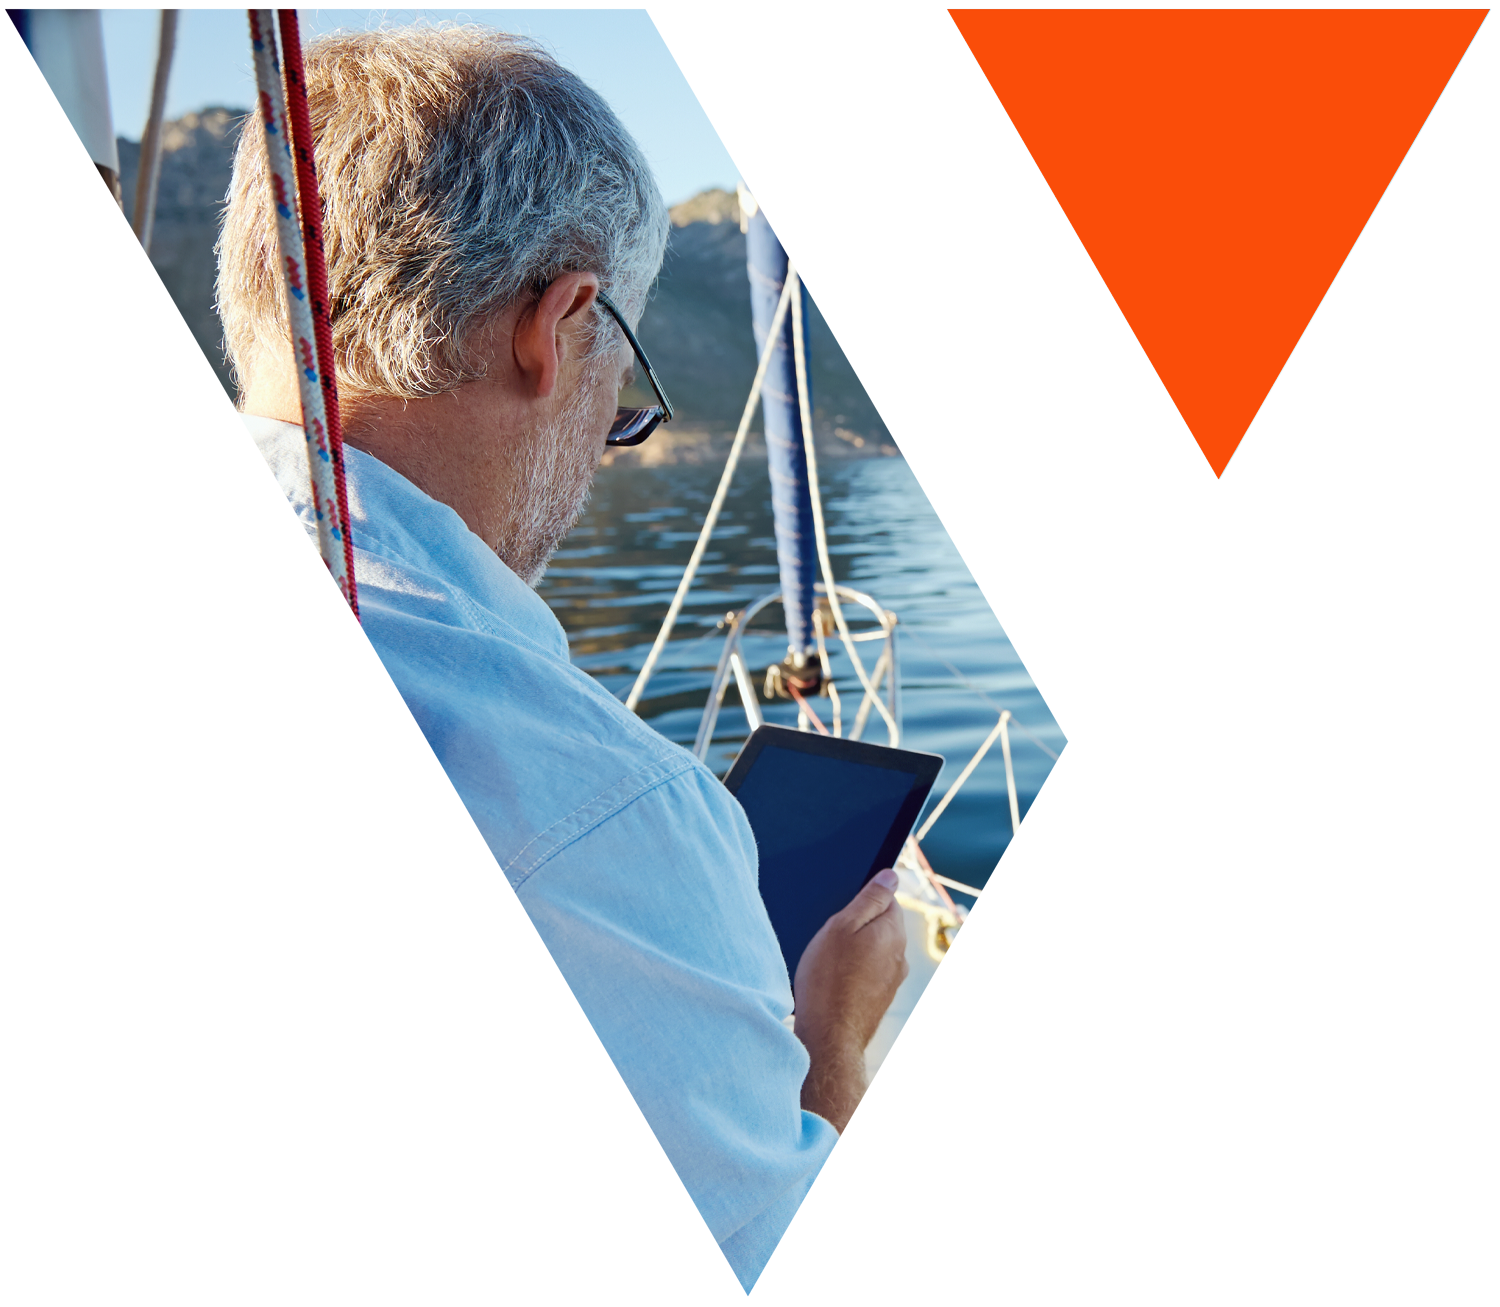 Person looks at tablet on a boat in image shaped like the Vision Financial Group logo